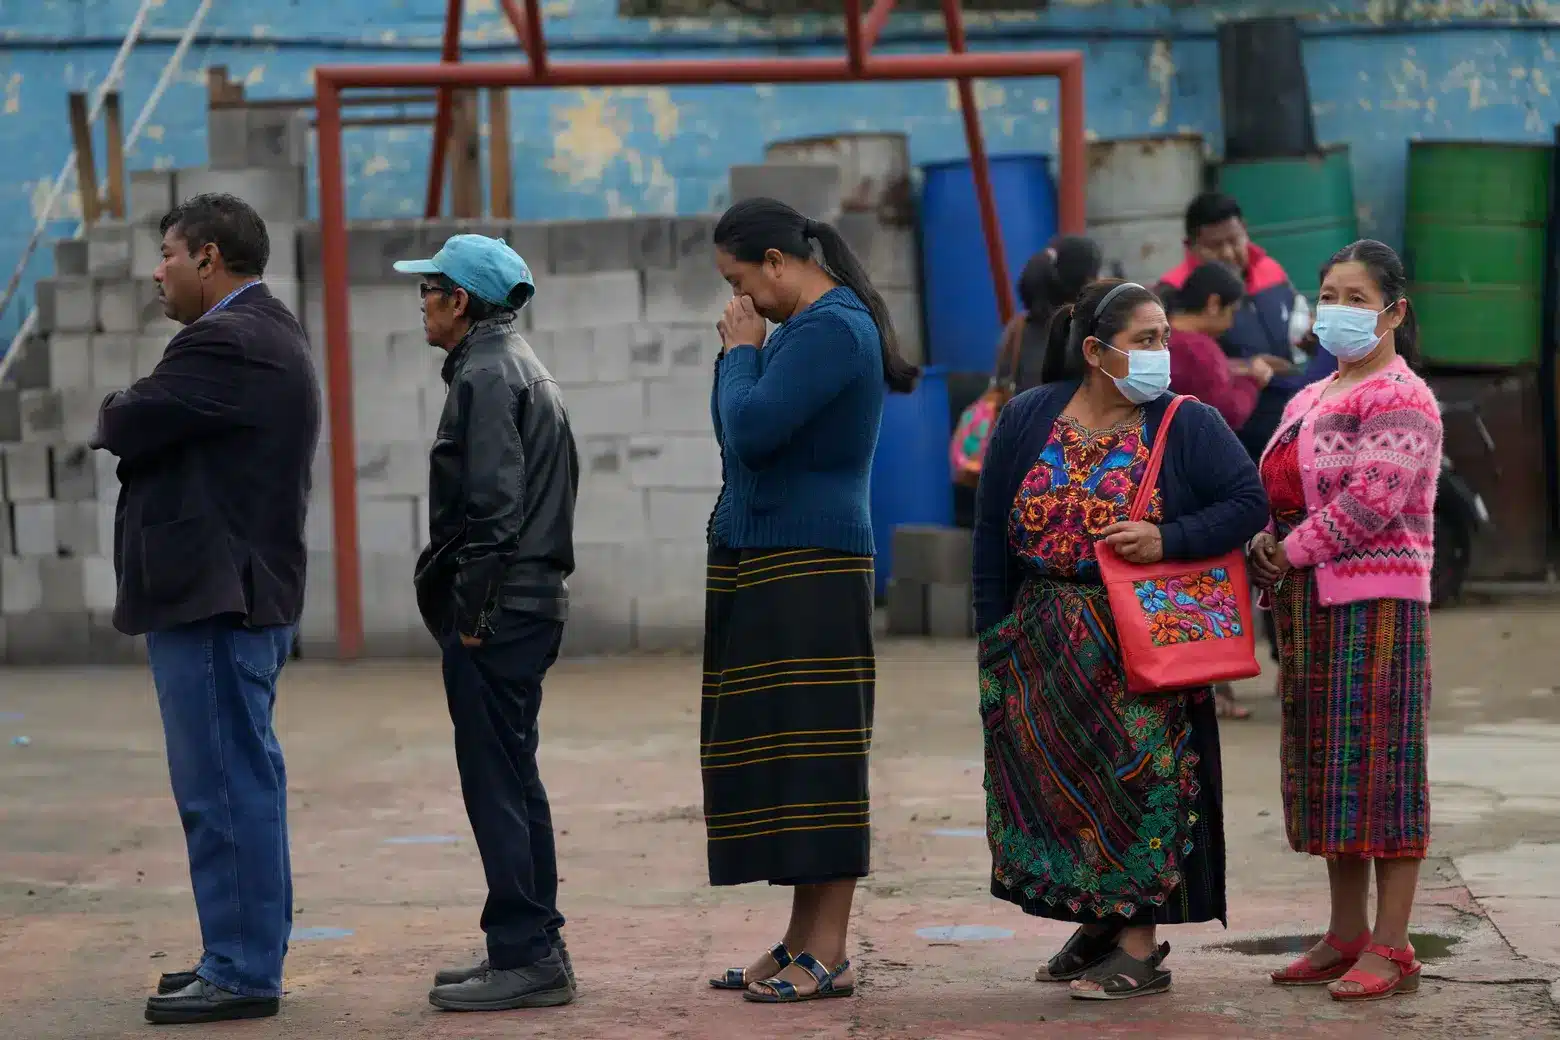 A line of voters in Guatemala. Photo: The Seattle Times.